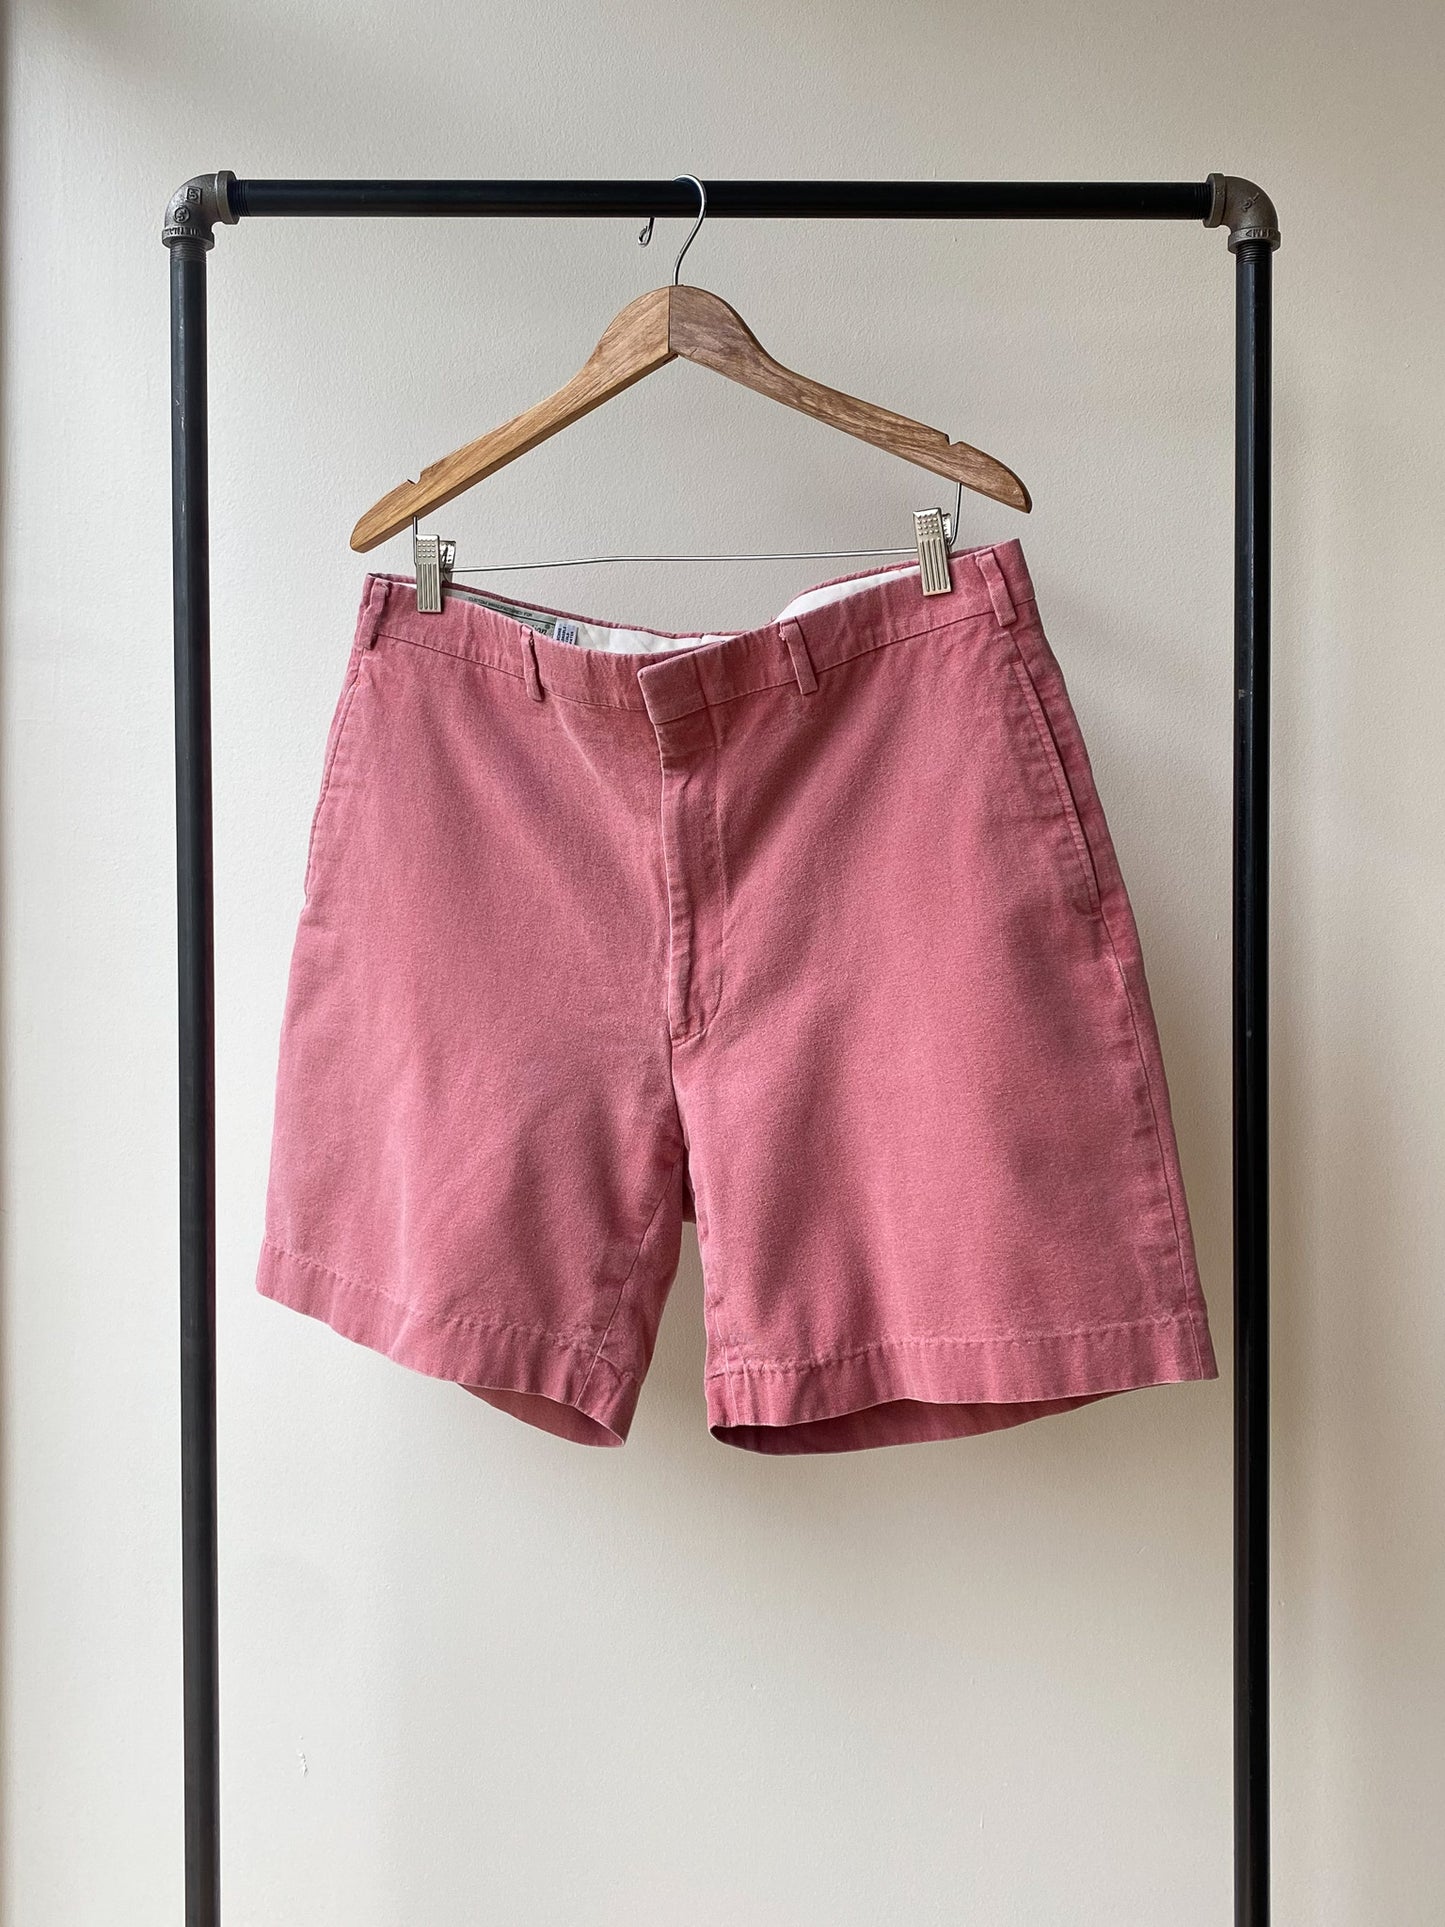 80's Grass Court Collection Tennis Shorts—[36]